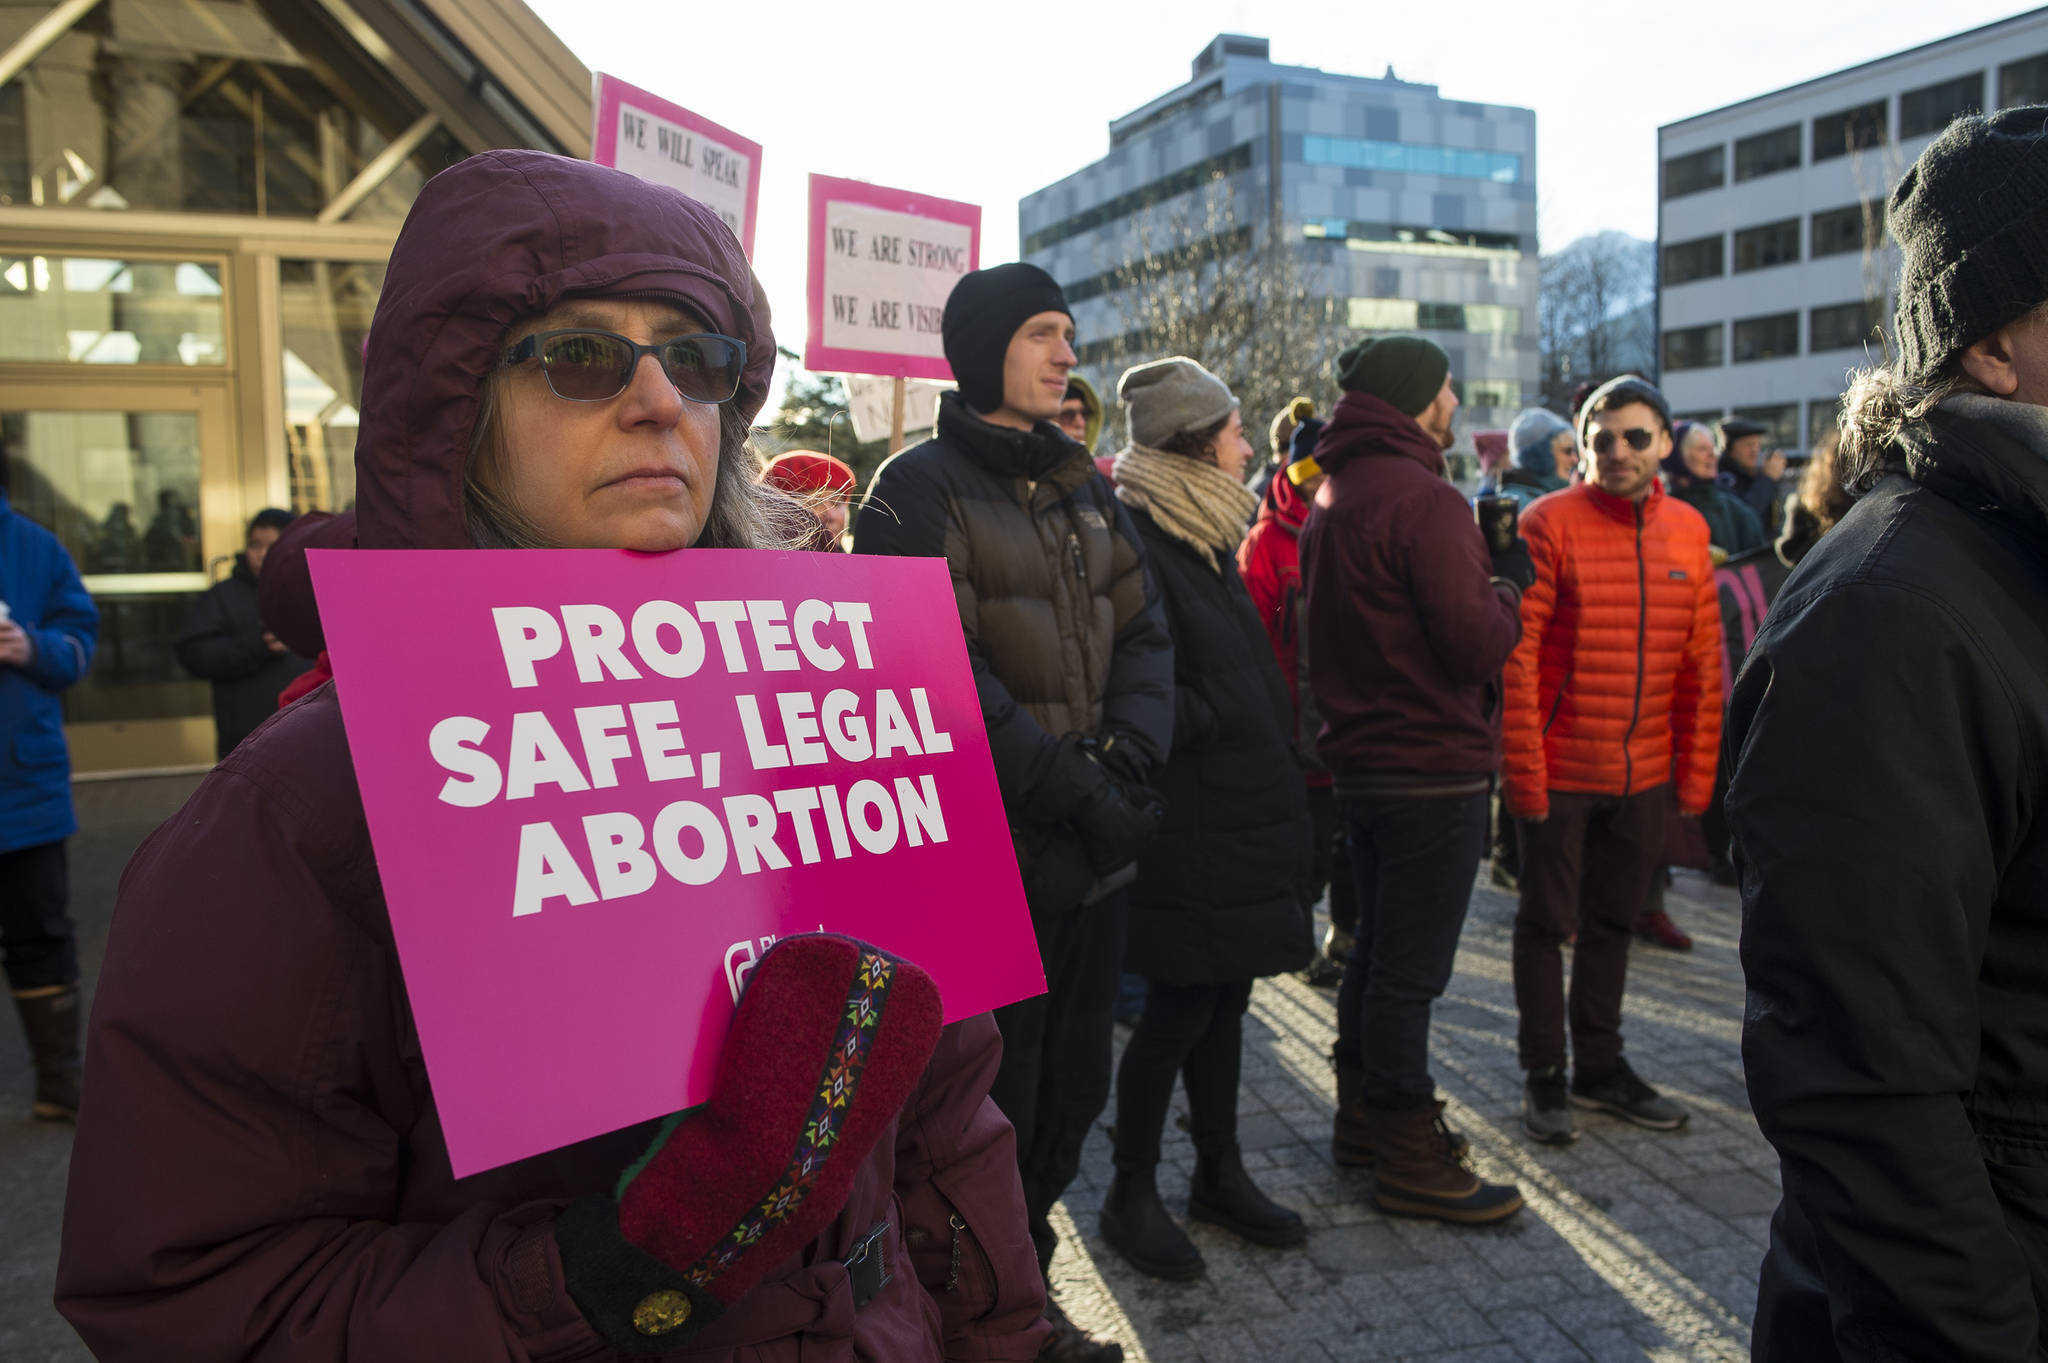 One-two punch: Planned Parenthood in Alaska loses state and federal funding